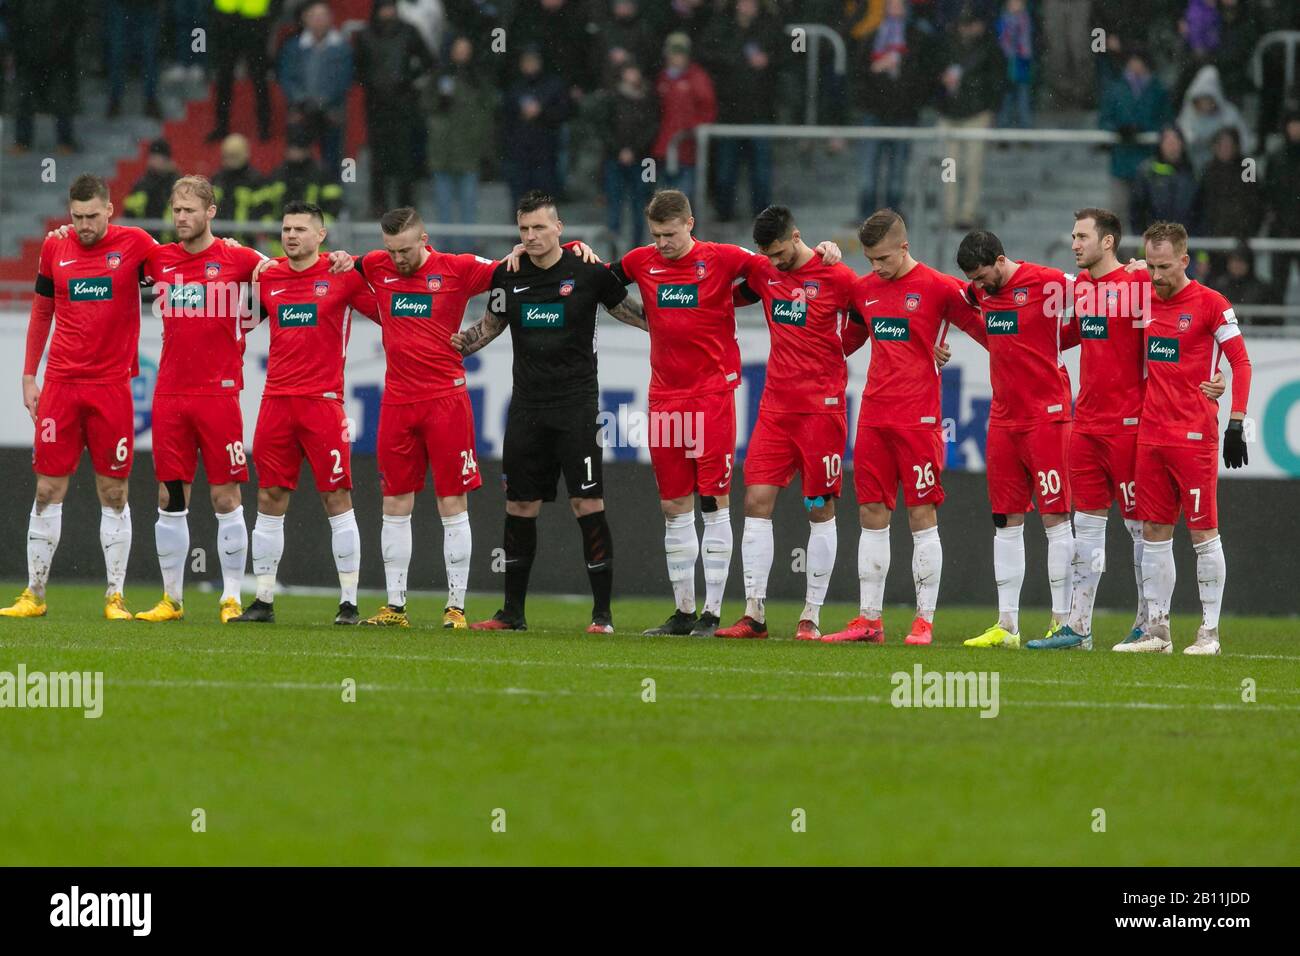 Kiel, Germany. 22nd Feb, 2020. Football: 2nd Bundesliga, Holstein Kiel - 1st FC Heidenheim, 23rd matchday. The team from Heidenheim during a minute of silence in the Kiel stadium in memory of the victims of Hanau. Credit: Frank Molter/dpa - IMPORTANT NOTE: In accordance with the regulations of the DFL Deutsche Fußball Liga and the DFB Deutscher Fußball-Bund, it is prohibited to exploit or have exploited in the stadium and/or from the game taken photographs in the form of sequence images and/or video-like photo series./dpa/Alamy Live News Stock Photo